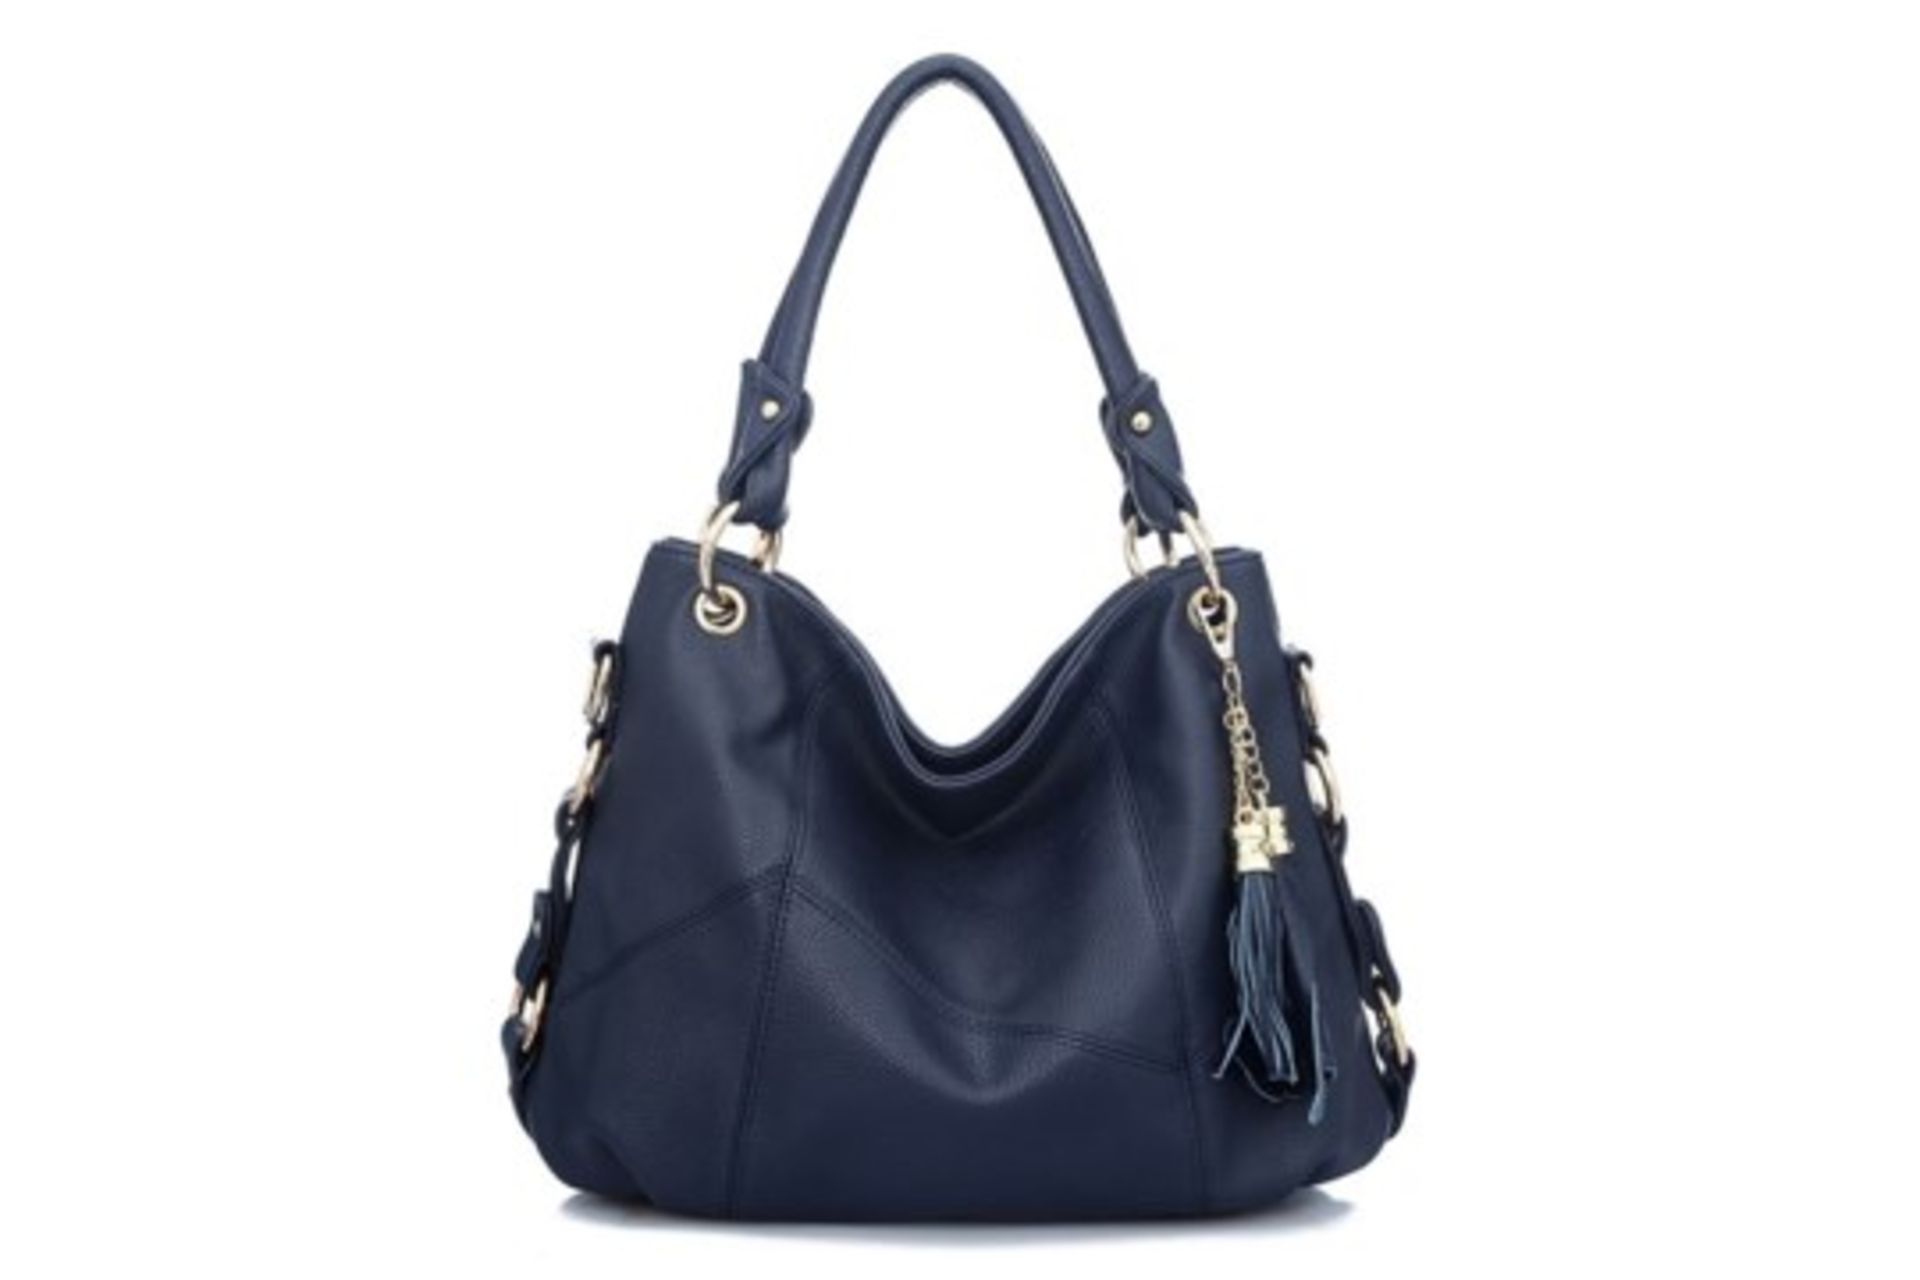 Brand New Womens Coolives Metal Ring Top Bag in Navy Blue RRP £51.99